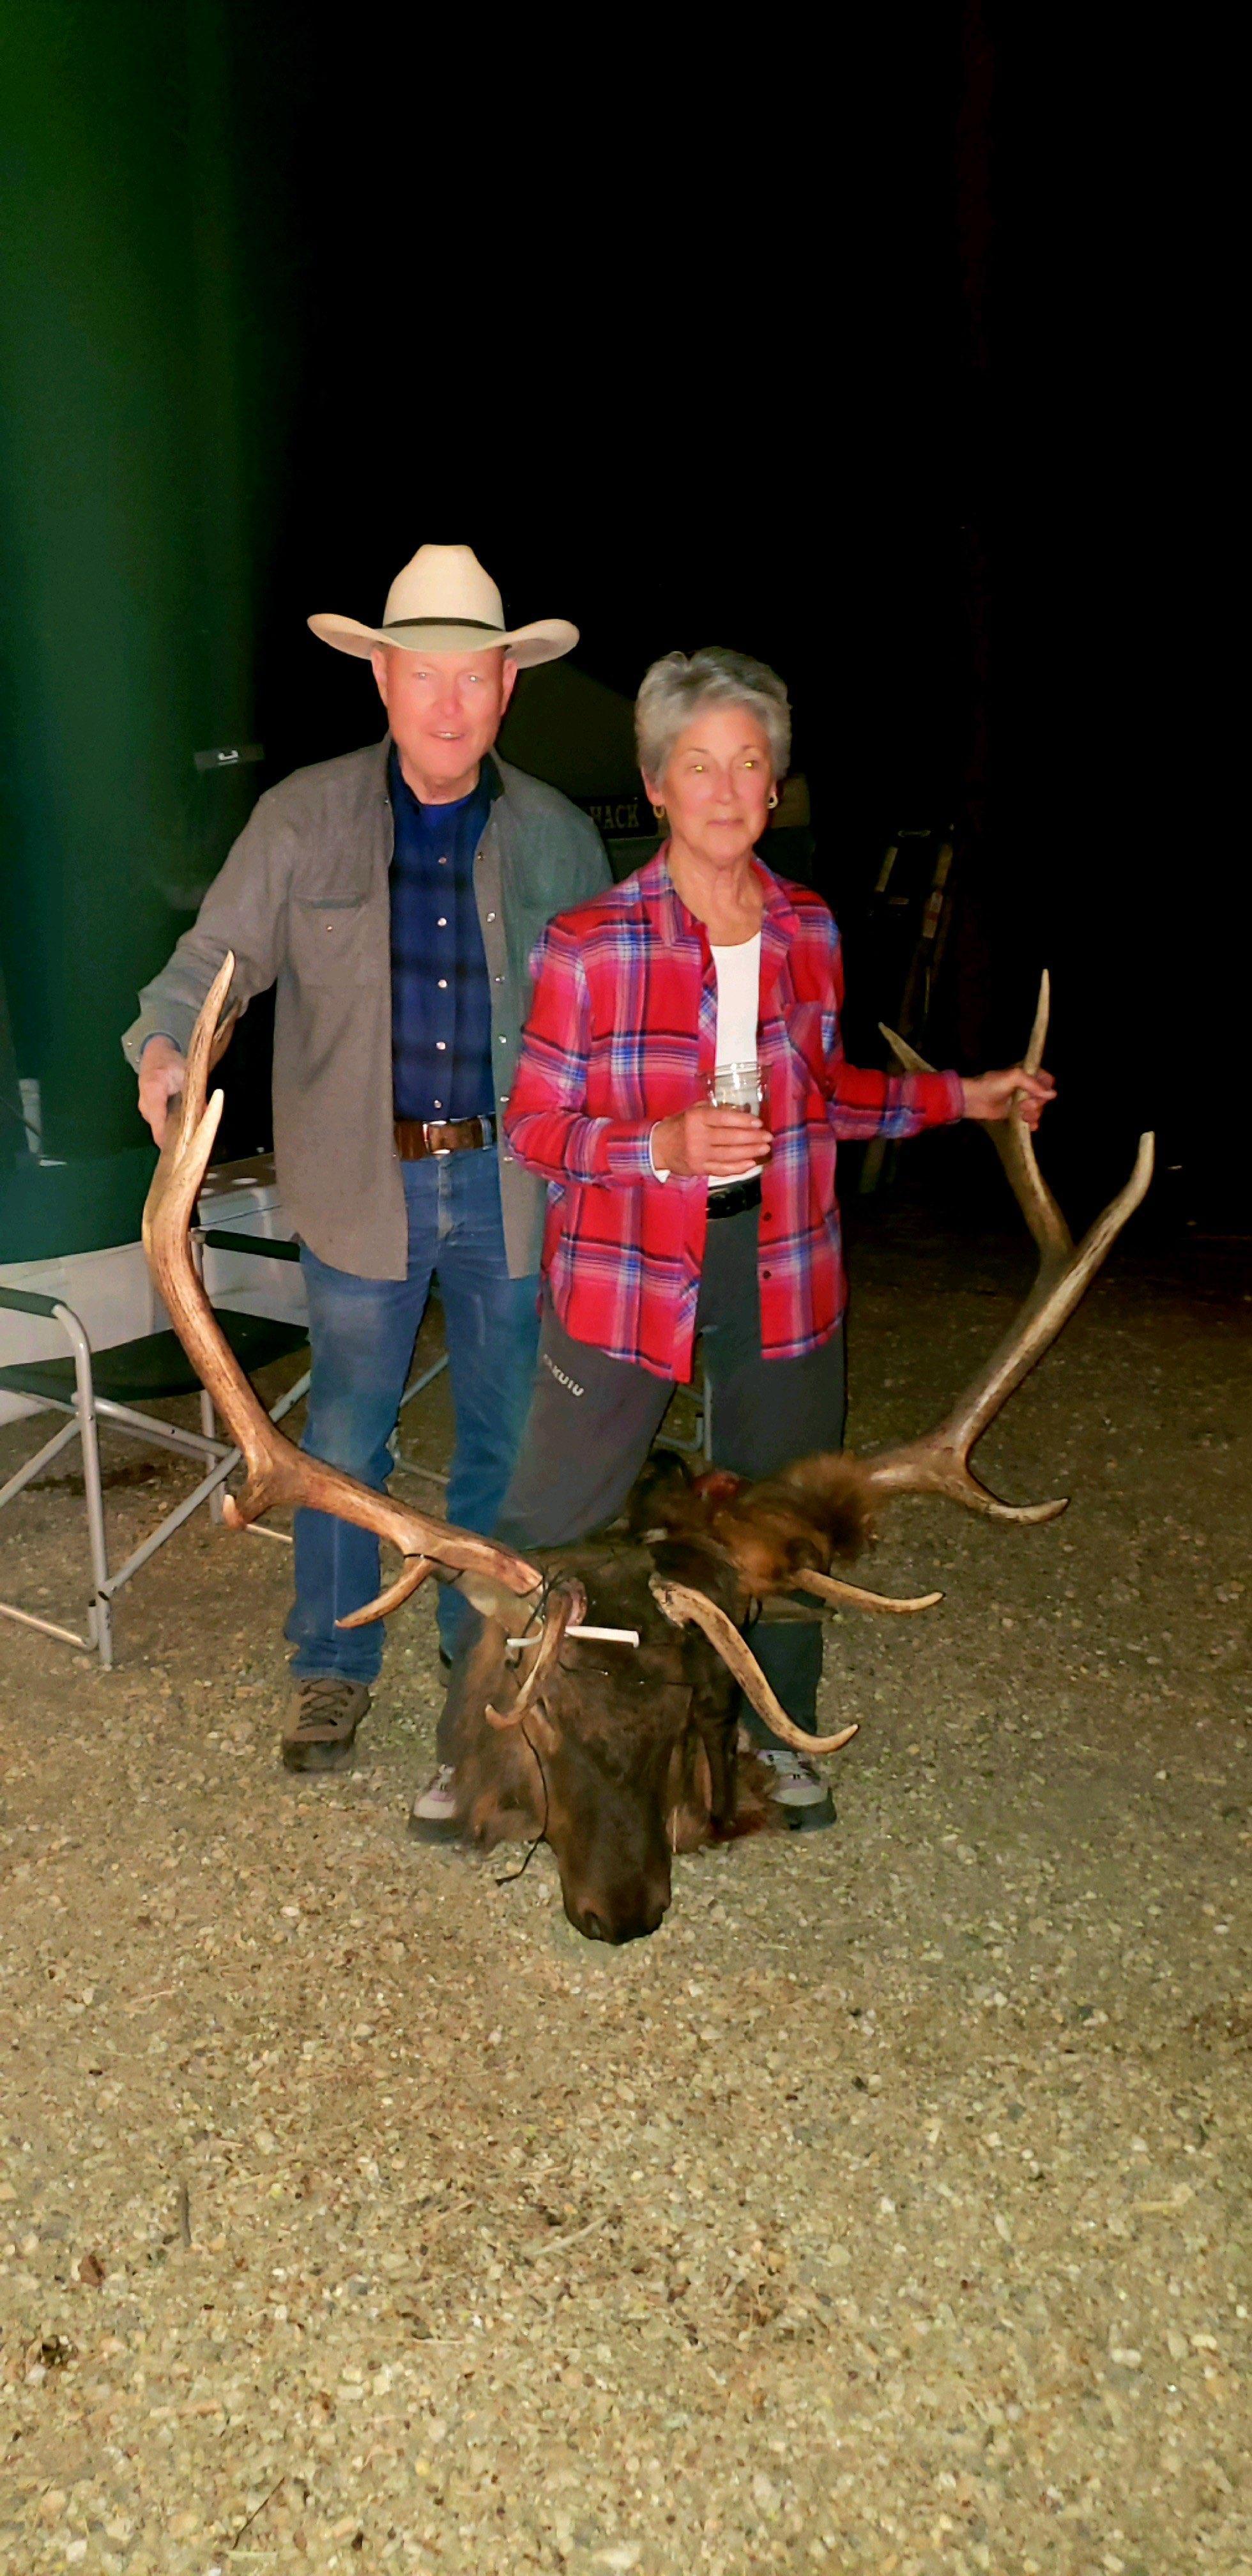 3 Bill and Sonia with the antlers.jpg